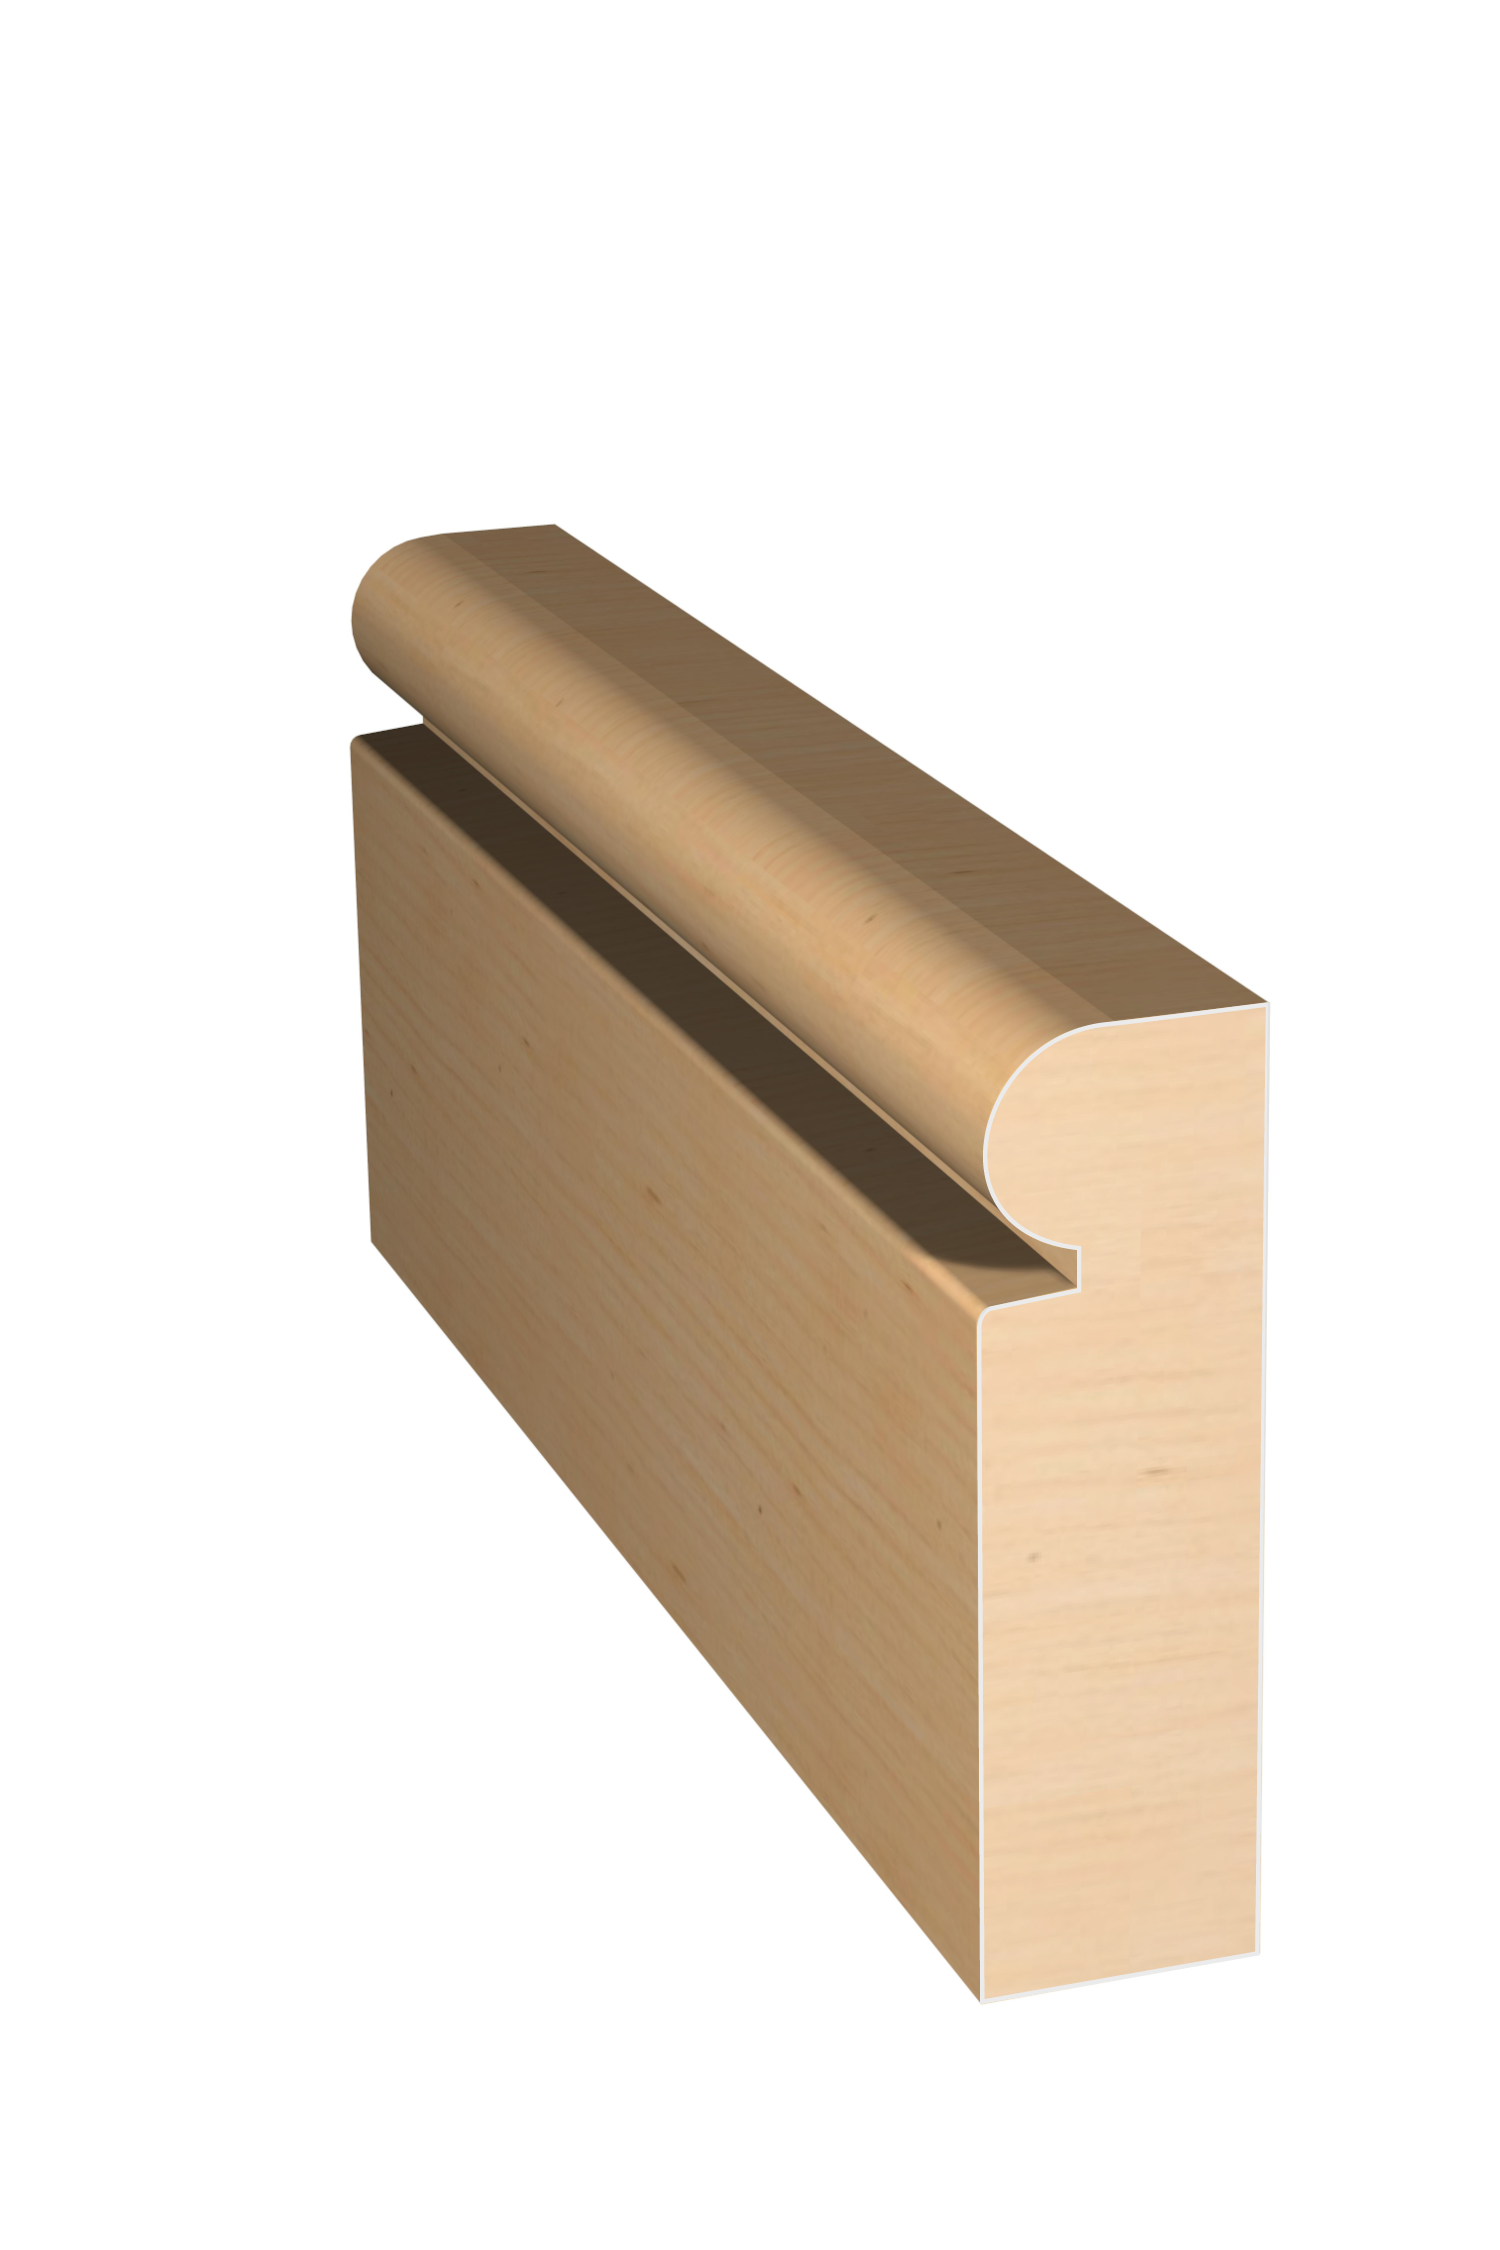 Three dimensional rendering of custom casing wood molding CAPL2128 made by Public Lumber Company in Detroit.